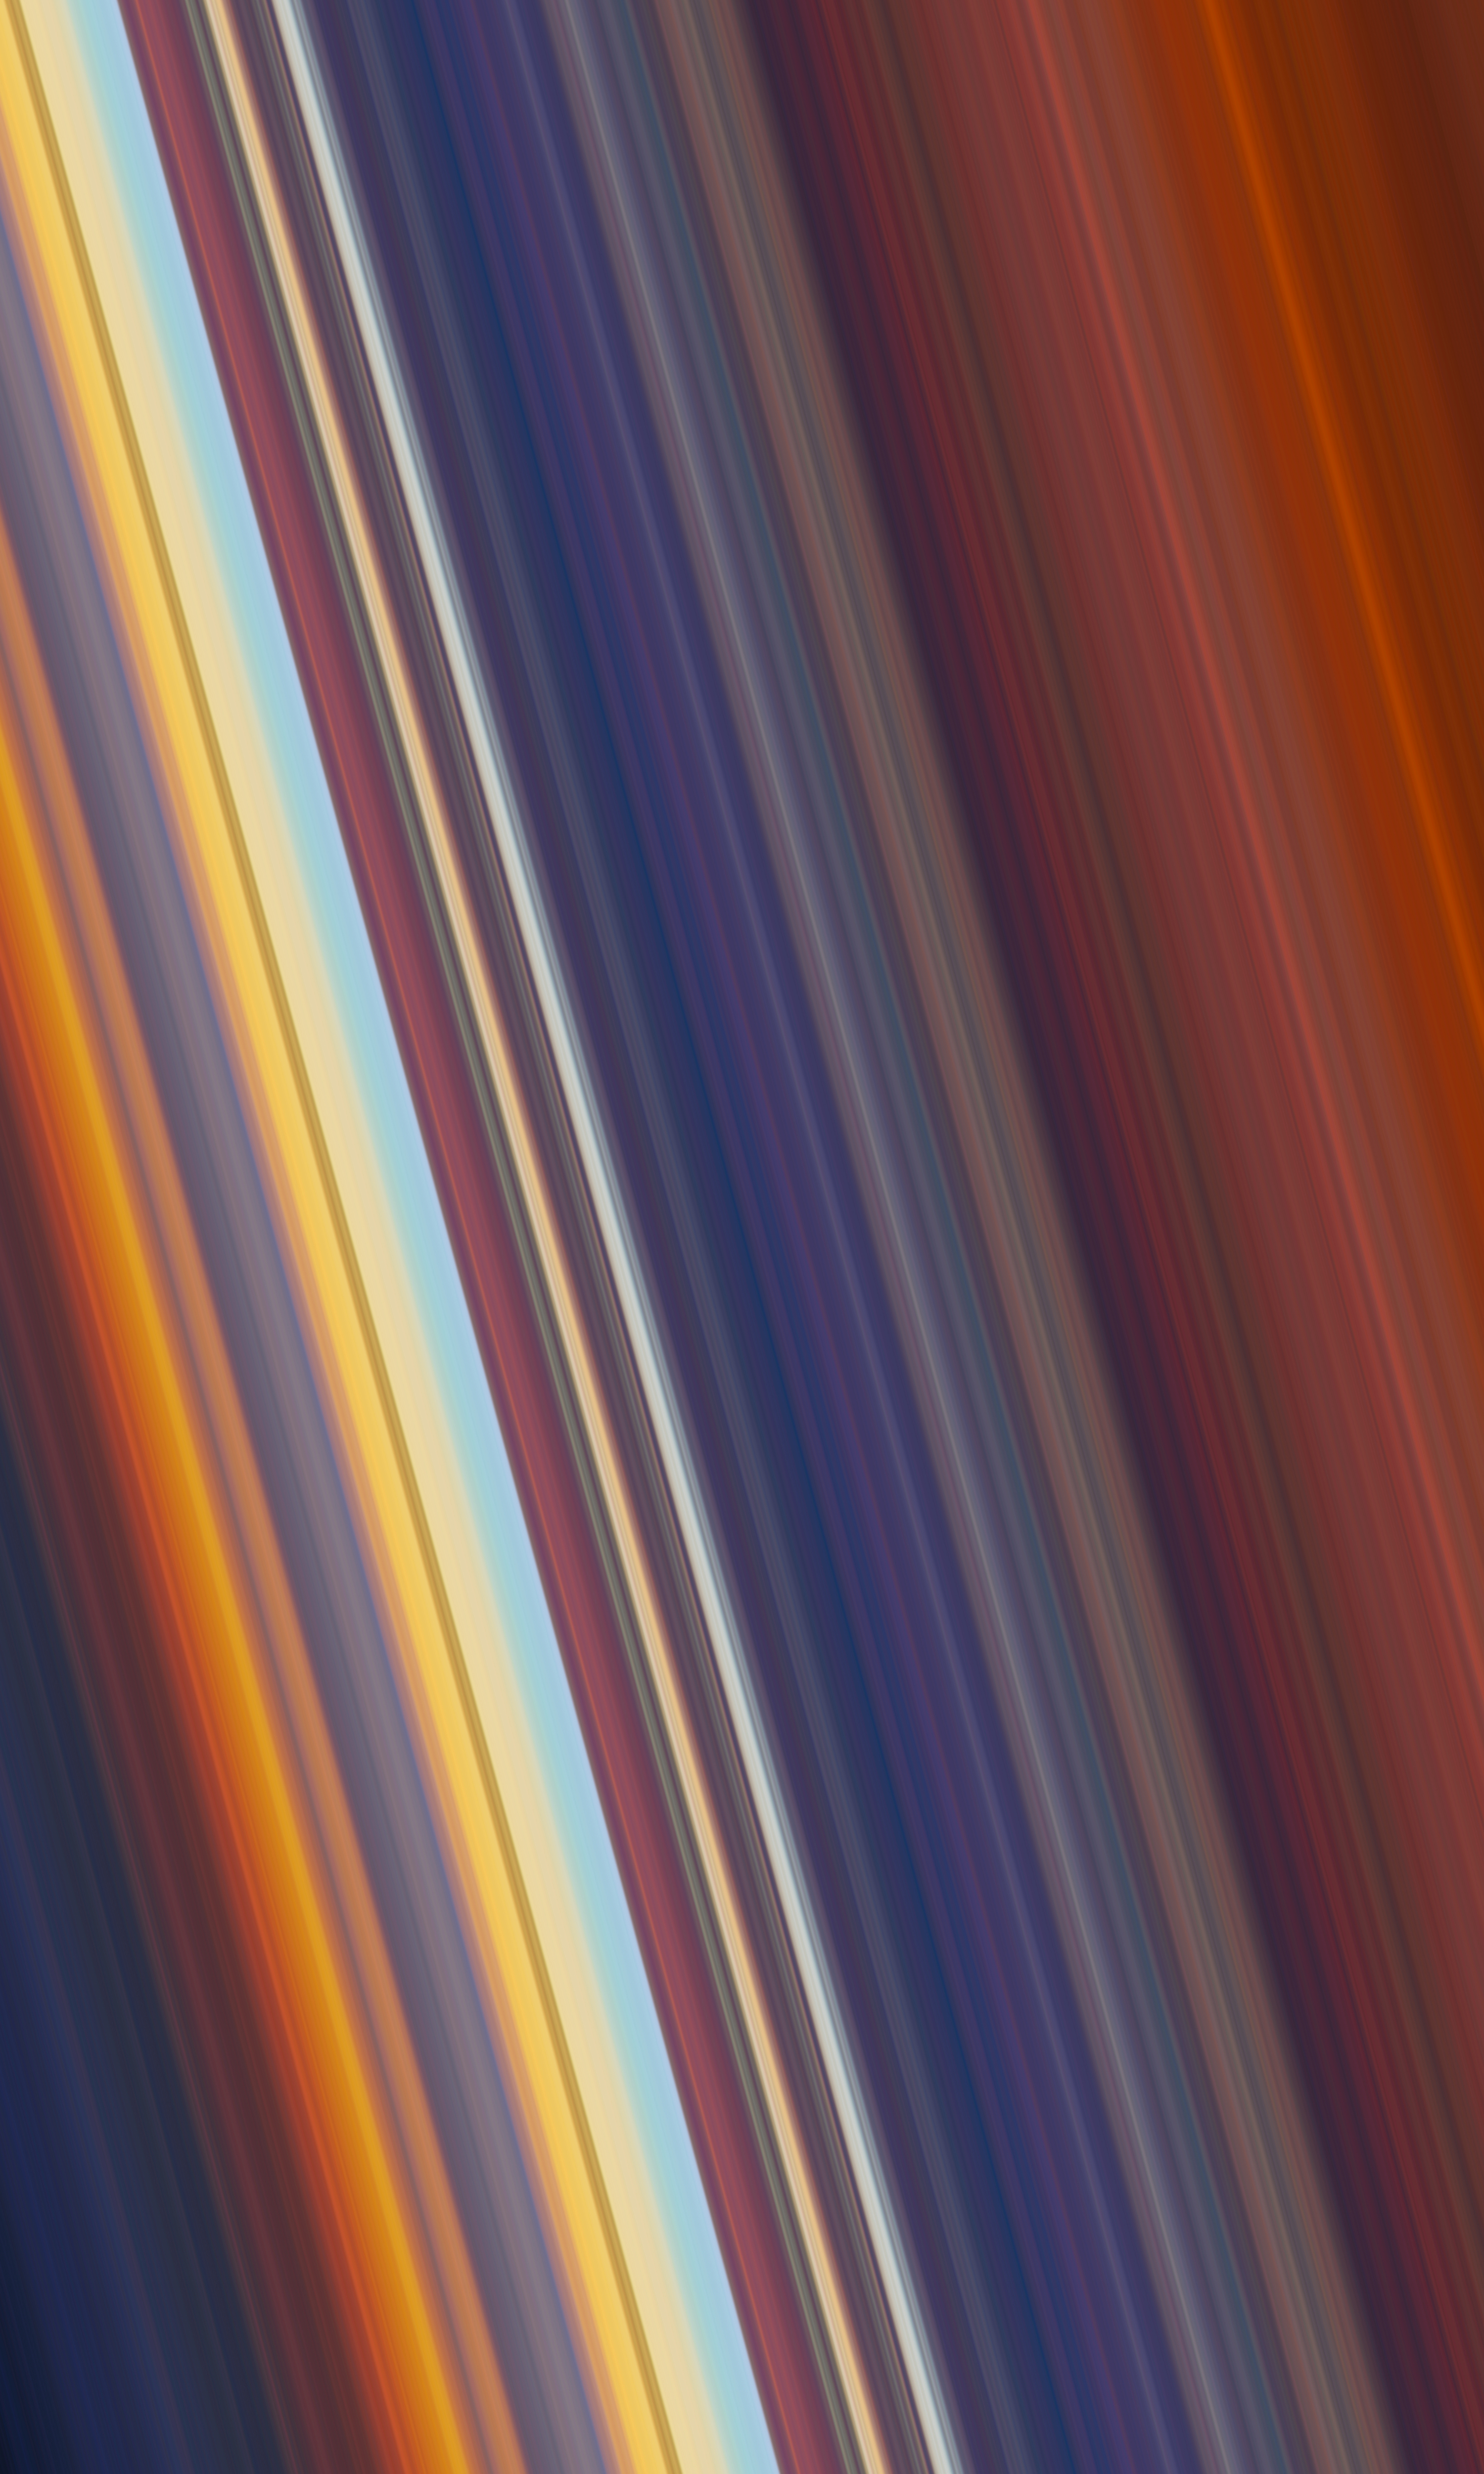 1920x1080 Background multicolored, abstract, motley, lines, stripes, streaks, obliquely